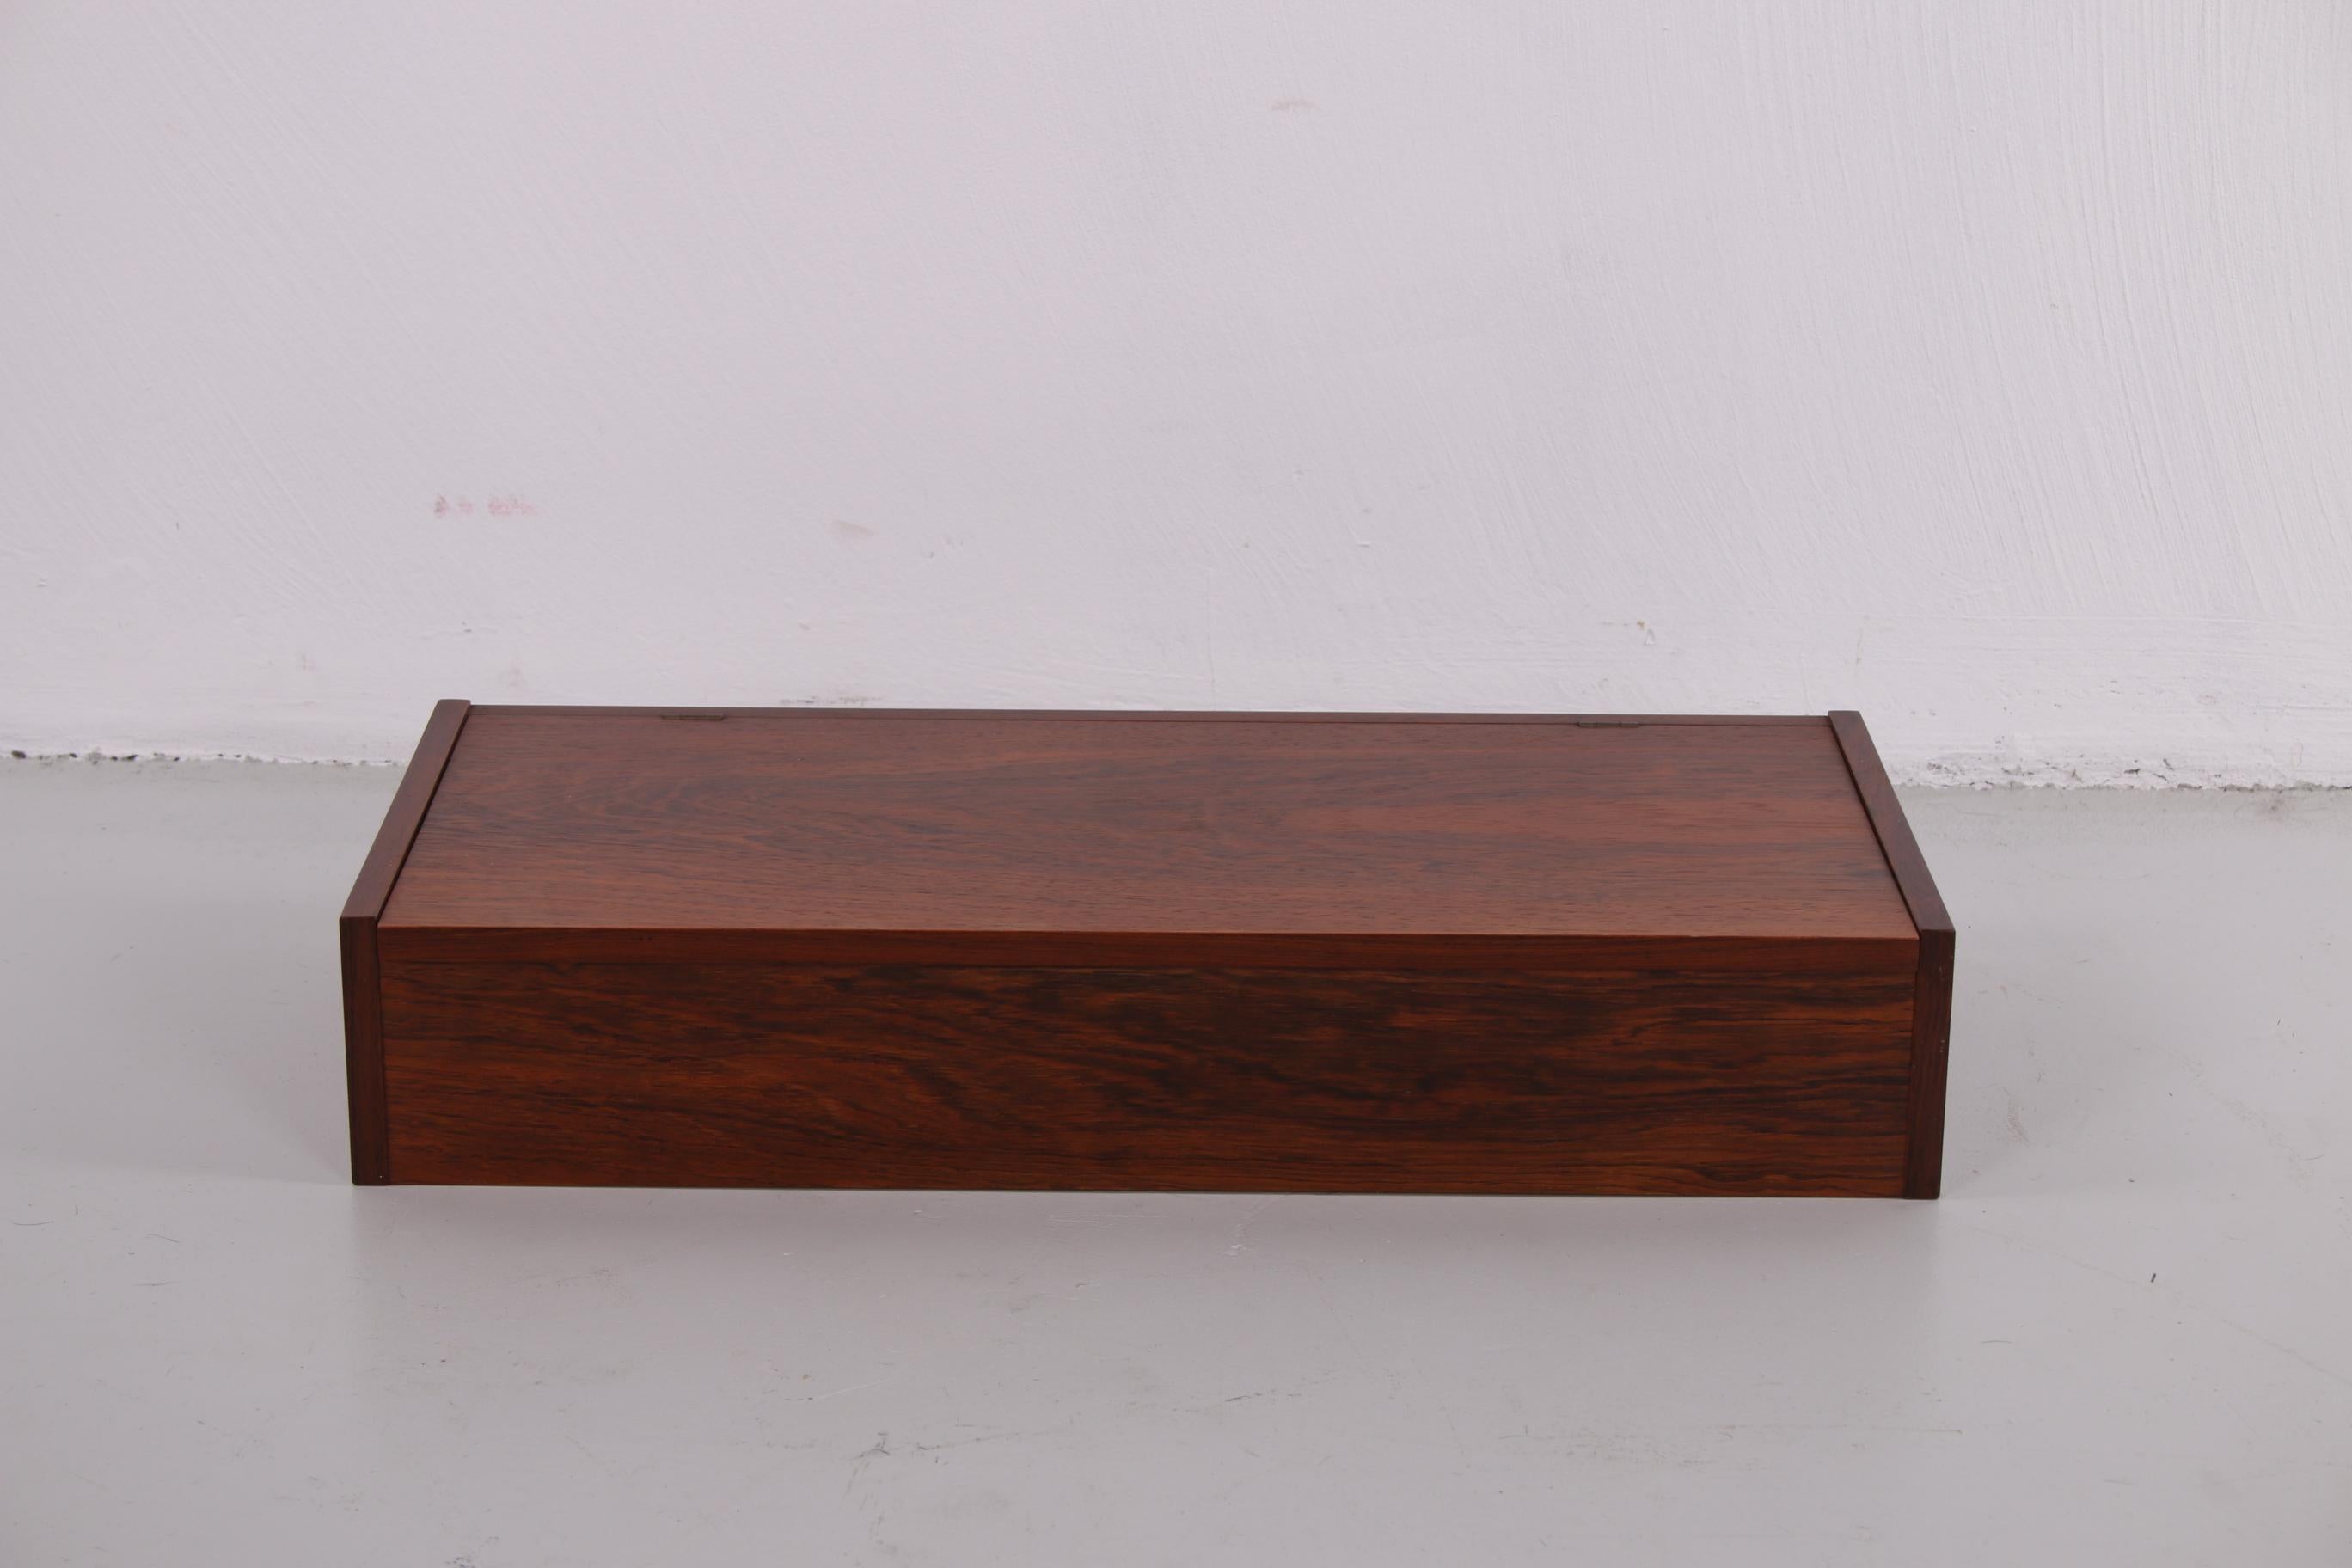 Solid Darkwood Table Box Cigar Box with Compartments Nicely Finished 6 3